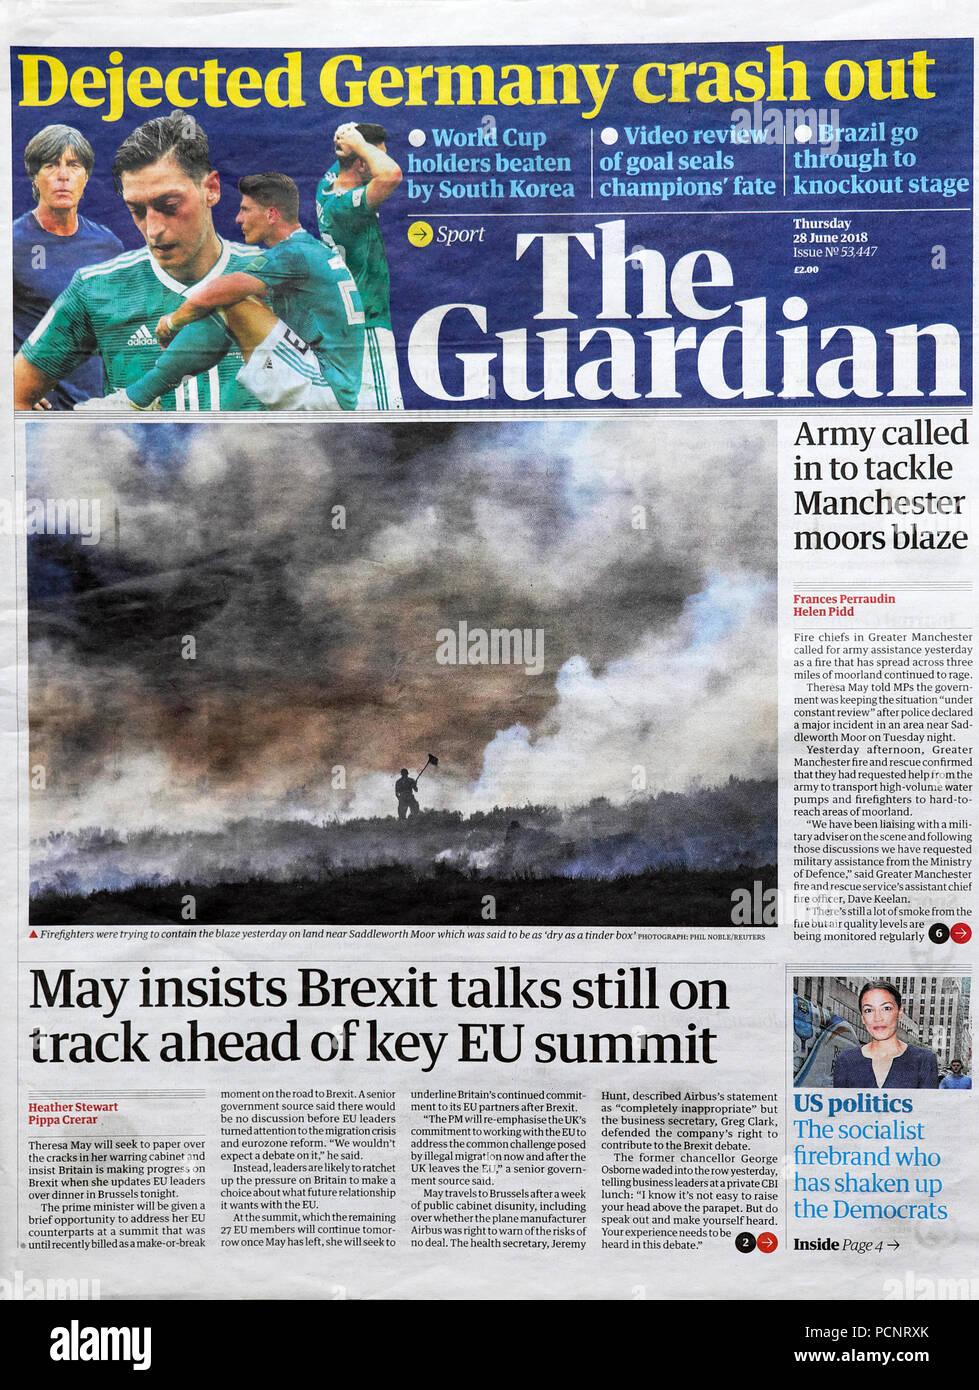 'Dejected Germany crash out' of World Cup 2018 and 'May insists Brexit still on track ahead of key EU Summit' Guardian Newspaper headline June 2018 UK Stock Photo